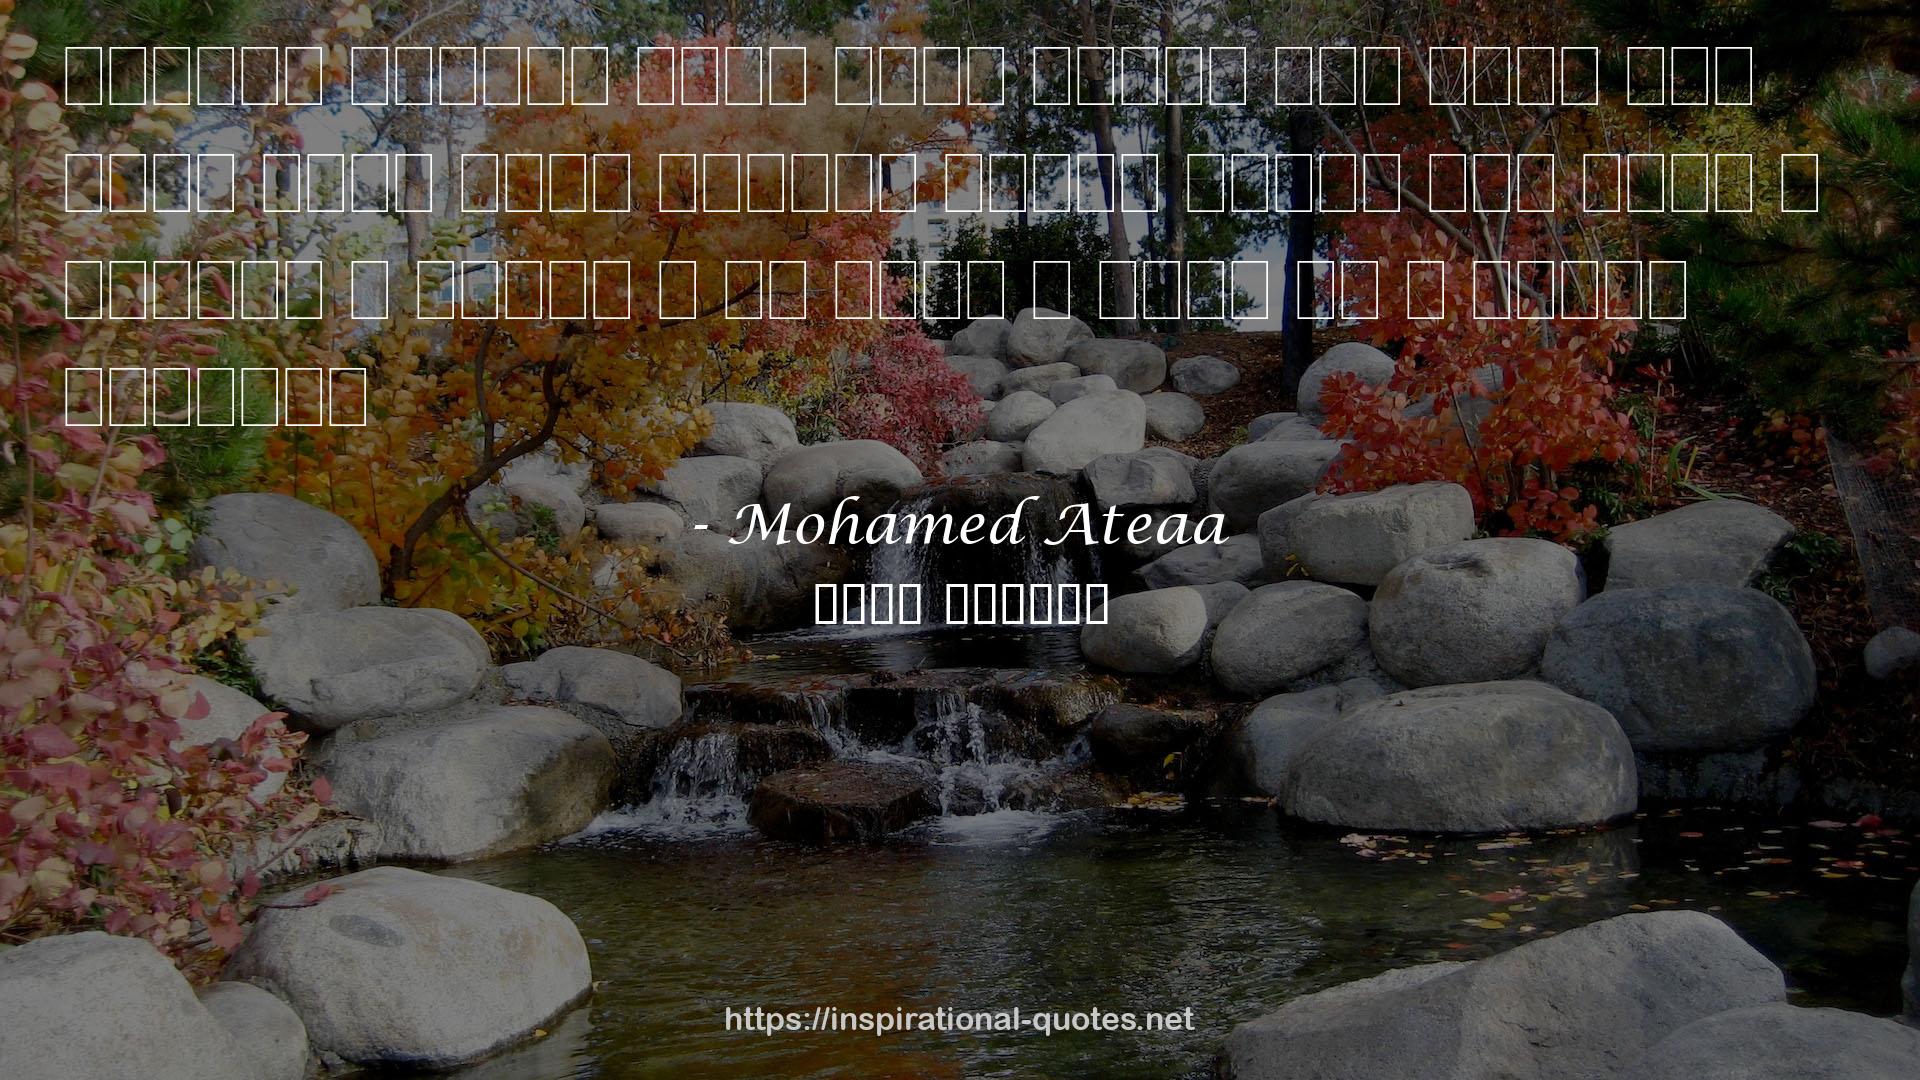 Mohamed Ateaa QUOTES